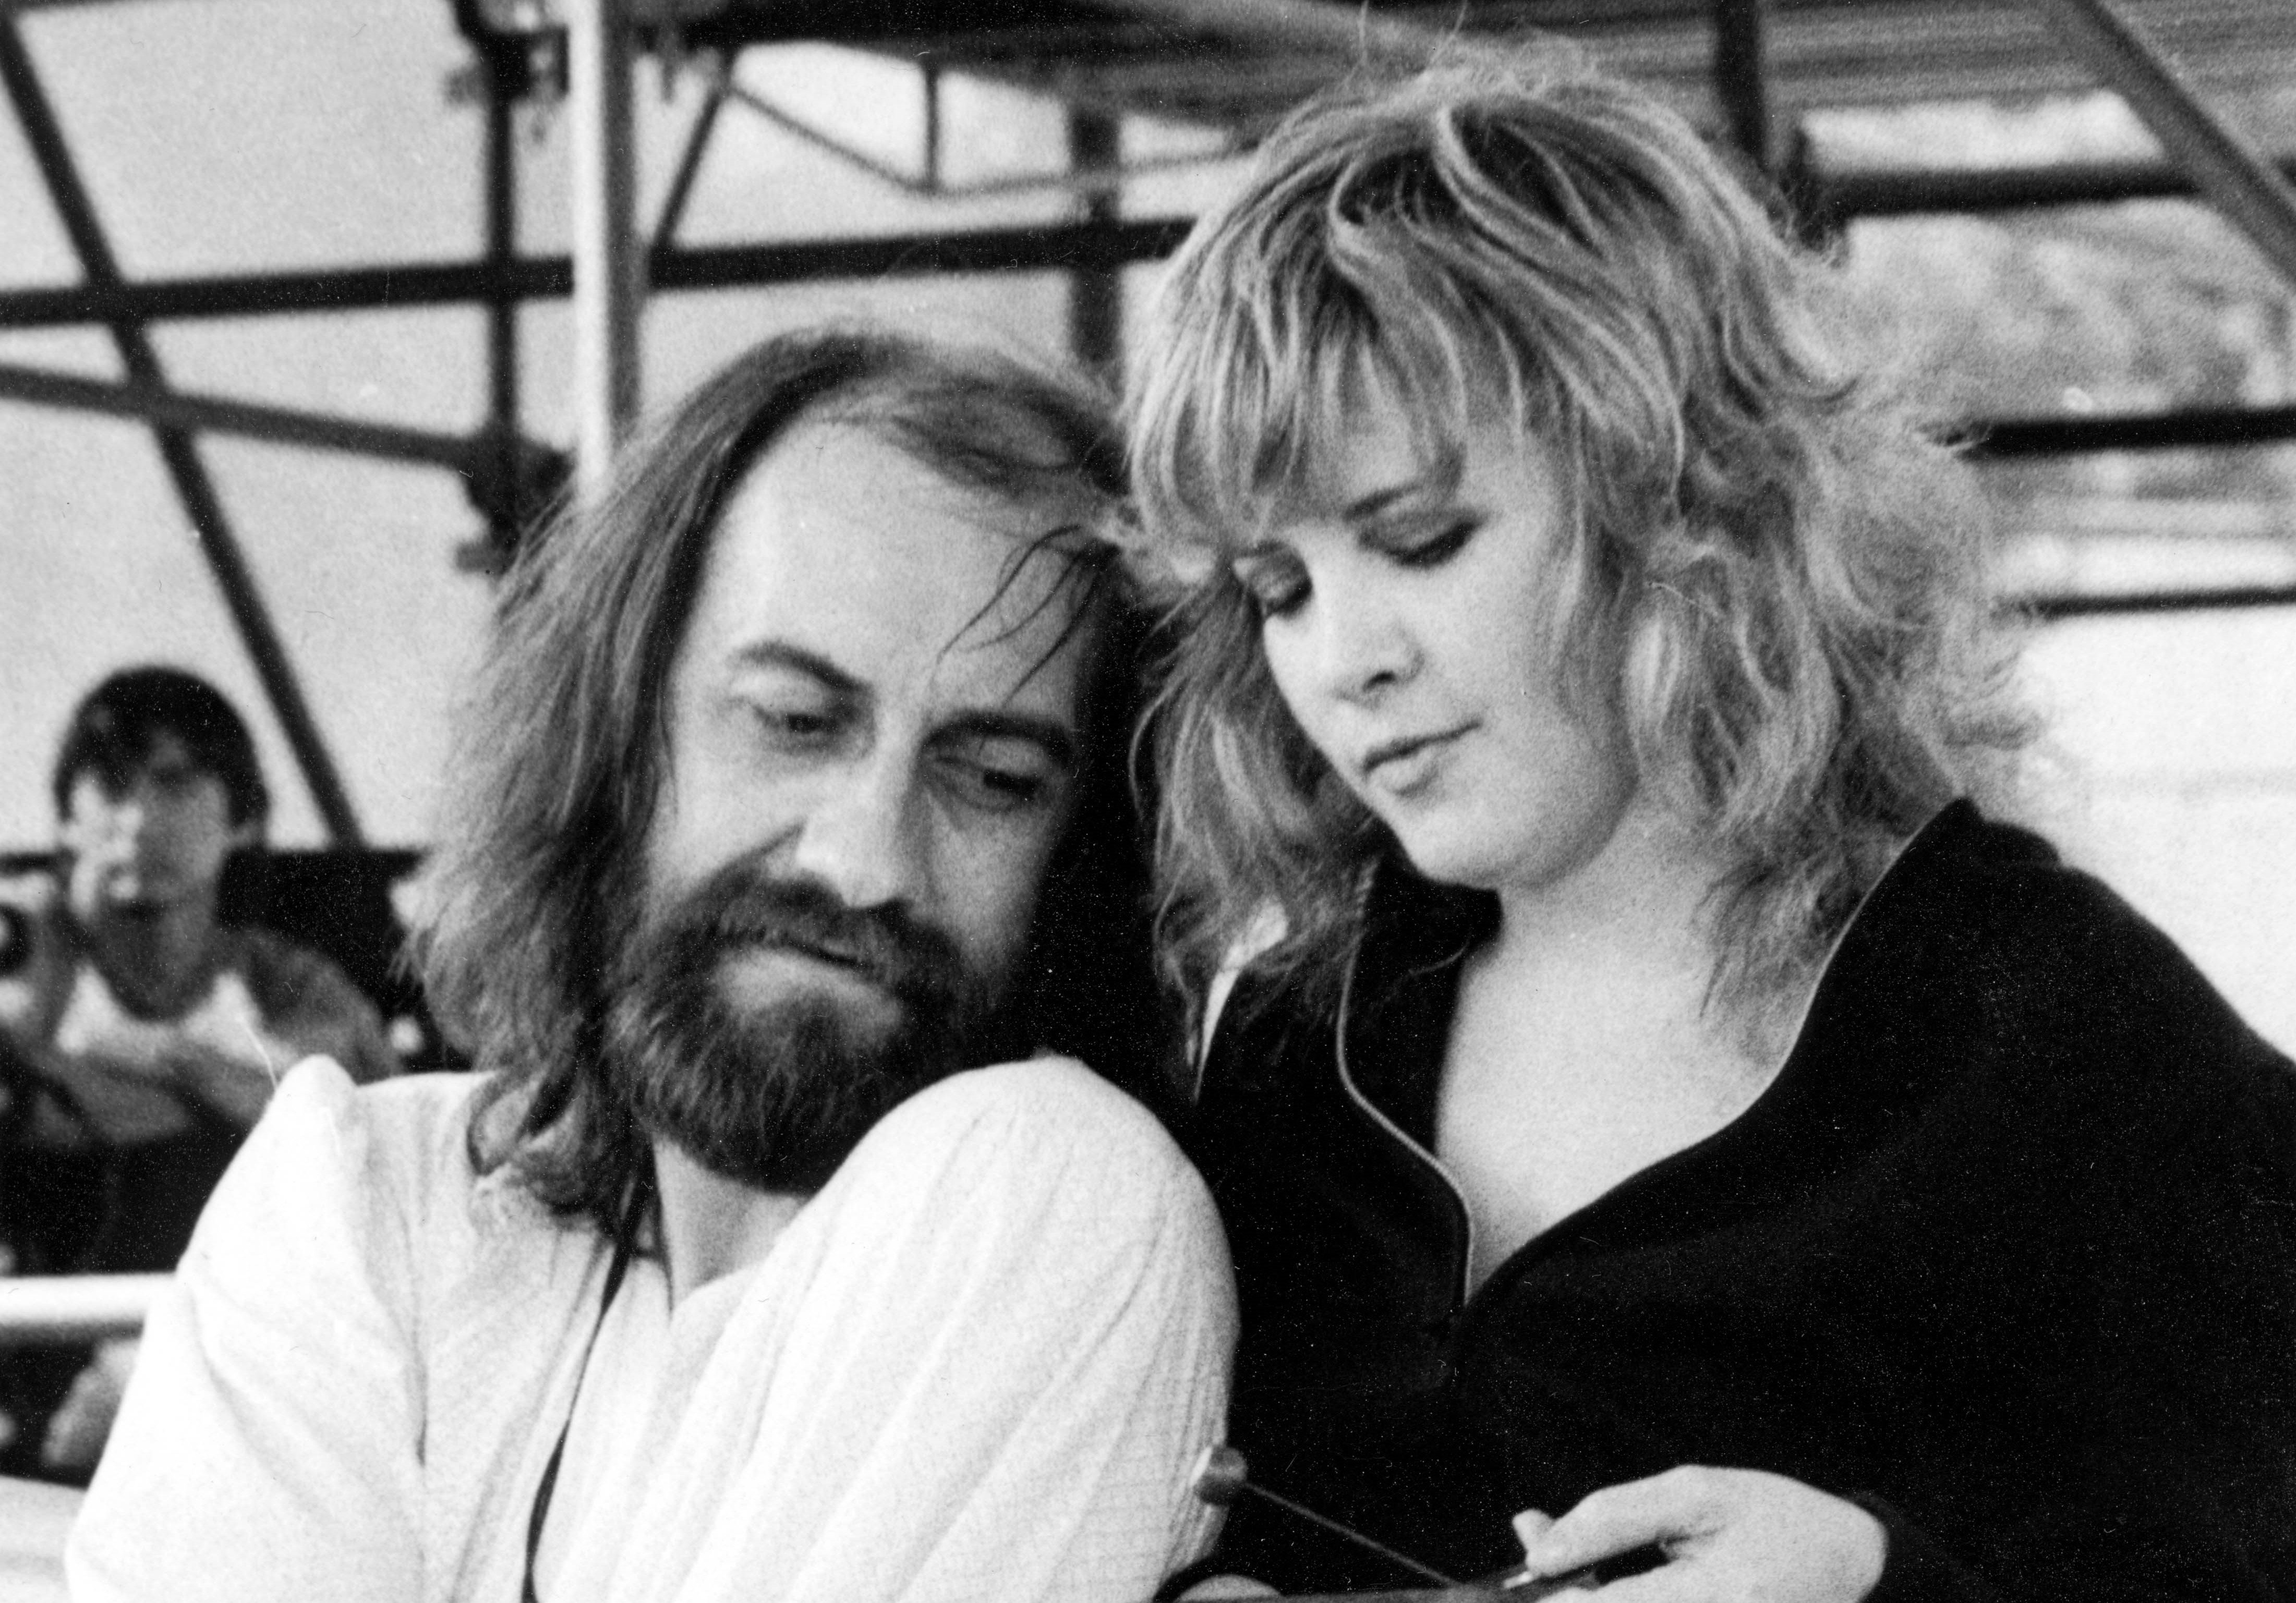 Mick Fleetwood wears a white shirt and Stevie Nicks wears a black shirt. He sits and she stands at his shoulder.